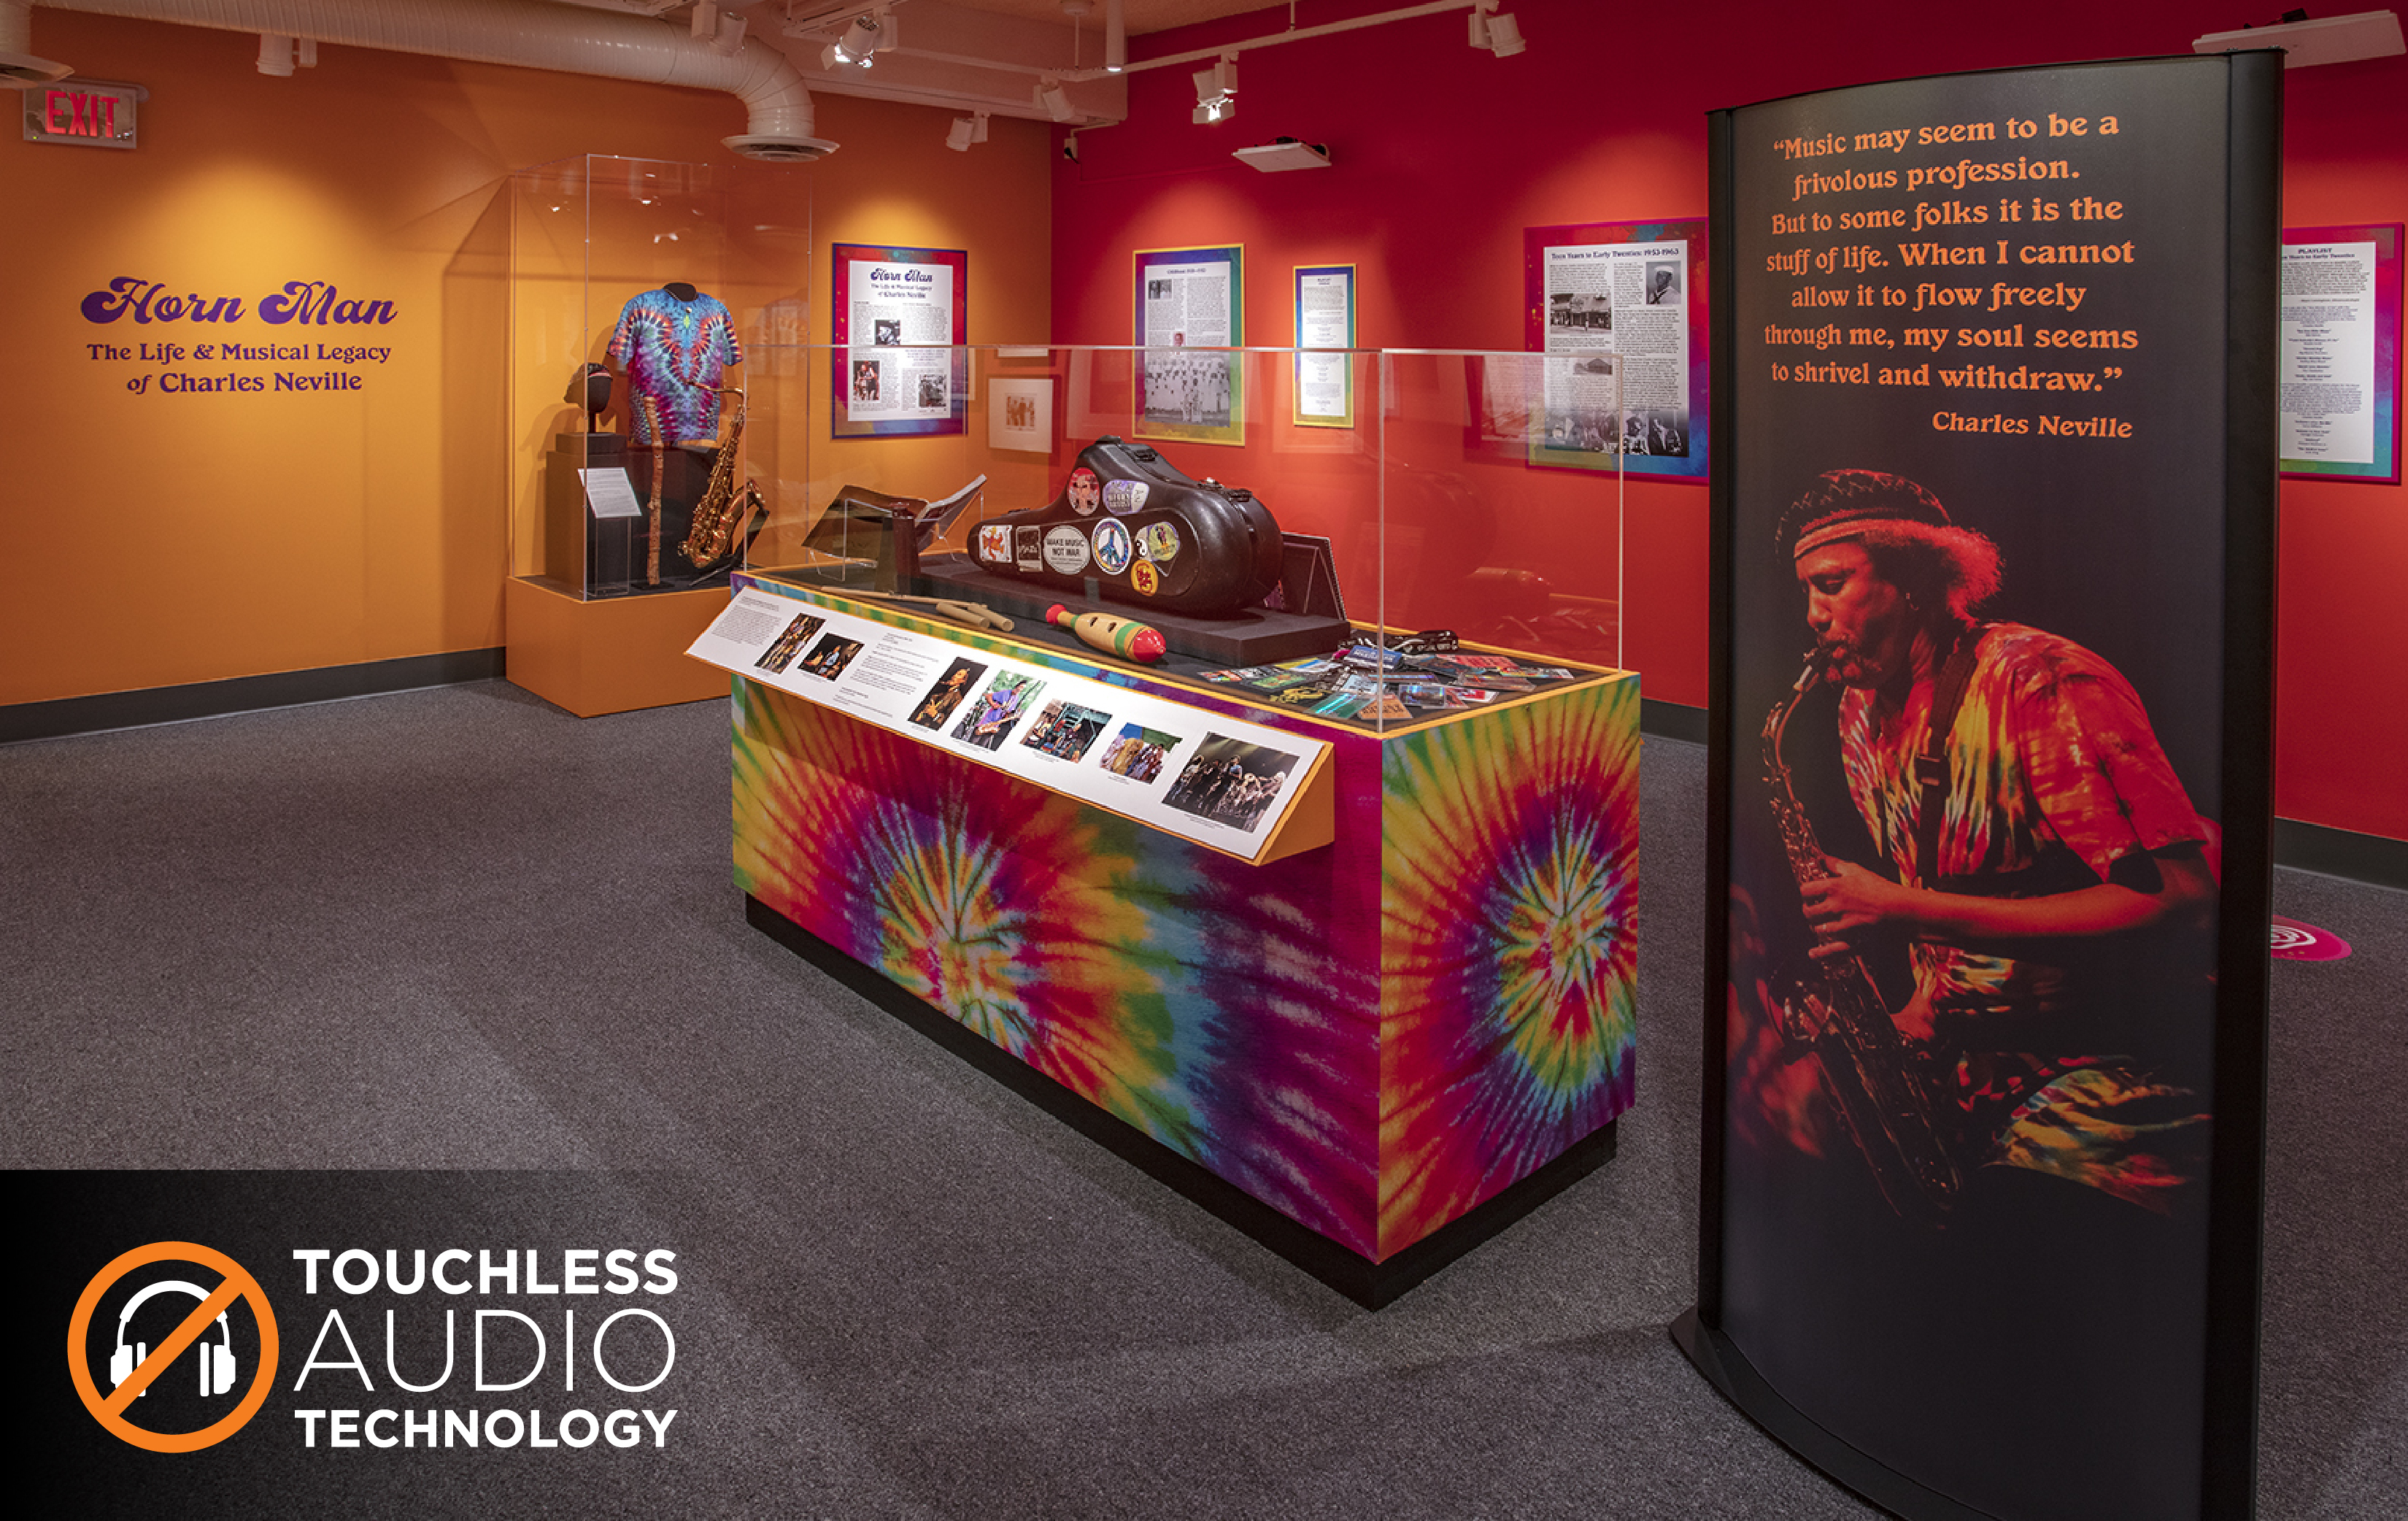 A display of music ephemera in a museum gallery, with a sign showing a picture of the musician Charles Neville and the quote "Museum may seem to be a frivolous profession. But to some folks it is the stuff of life. When I cannot allow it to flow freely through me, my soul seems to shrivel and withdraw."